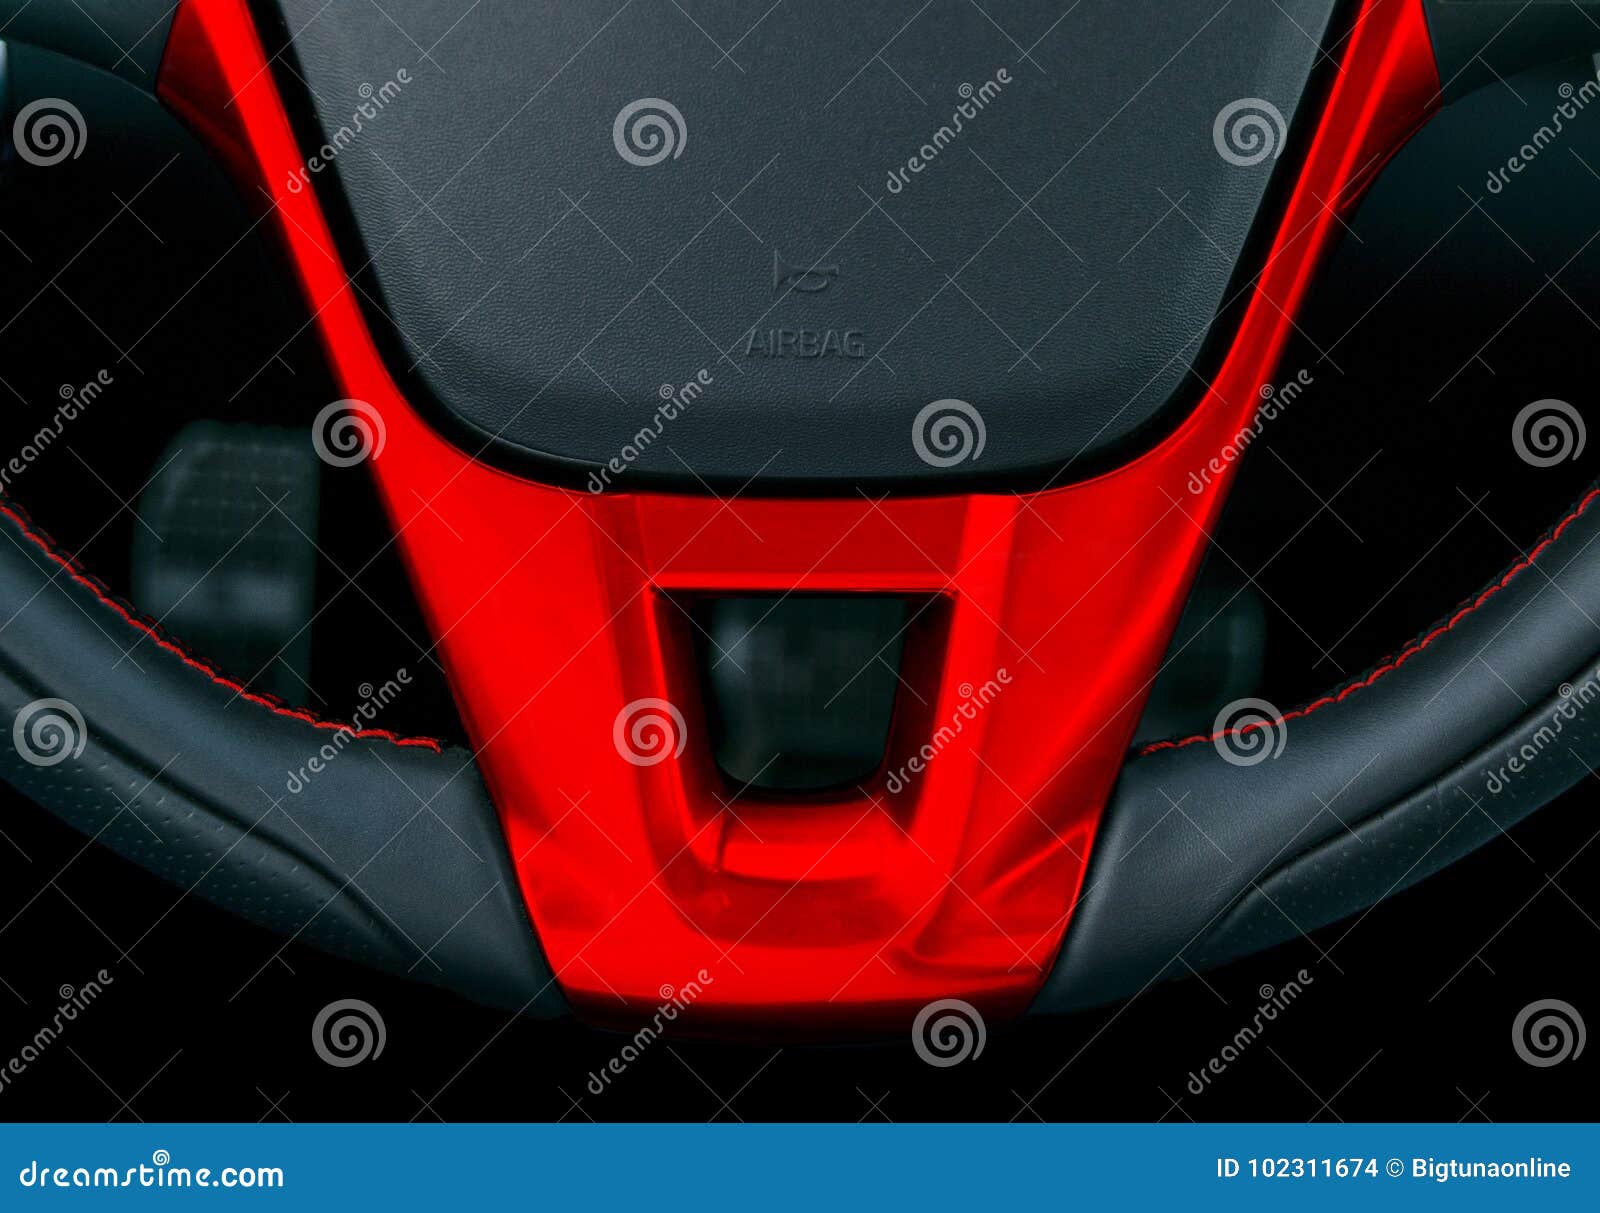 Close Up View Of Steering Wheel With Red Stich Black